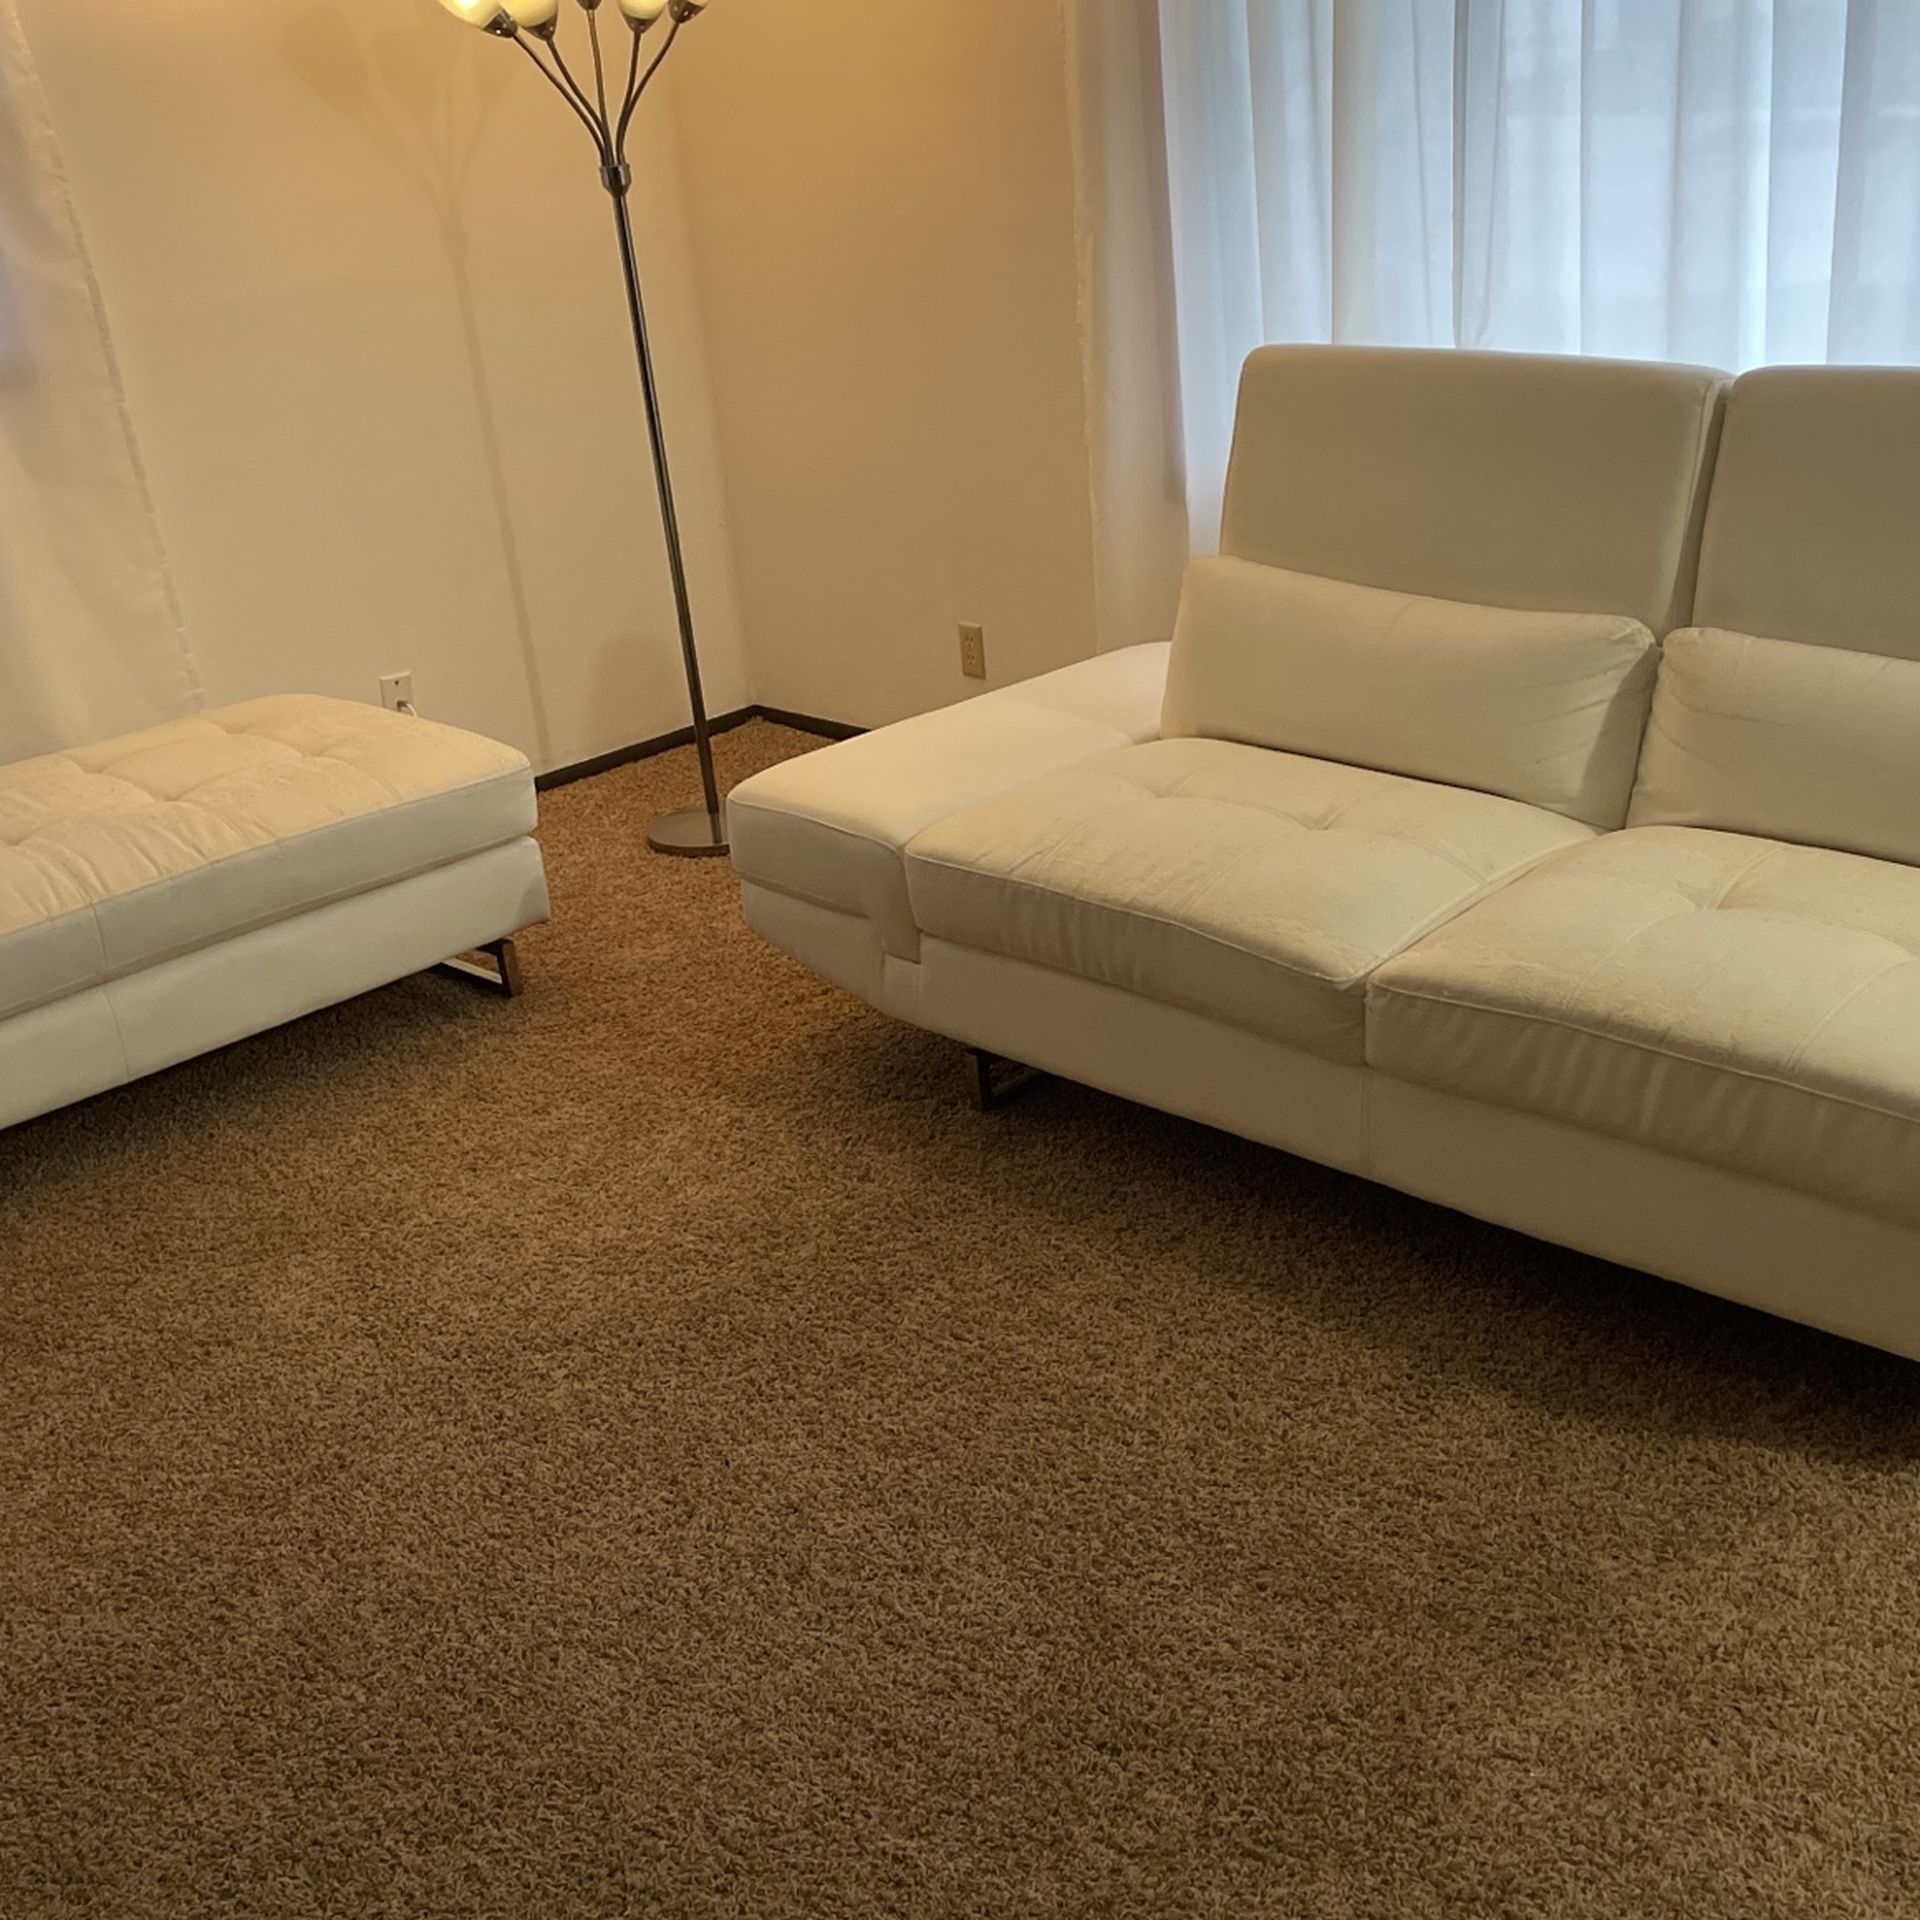 Love Seat And Ottoman